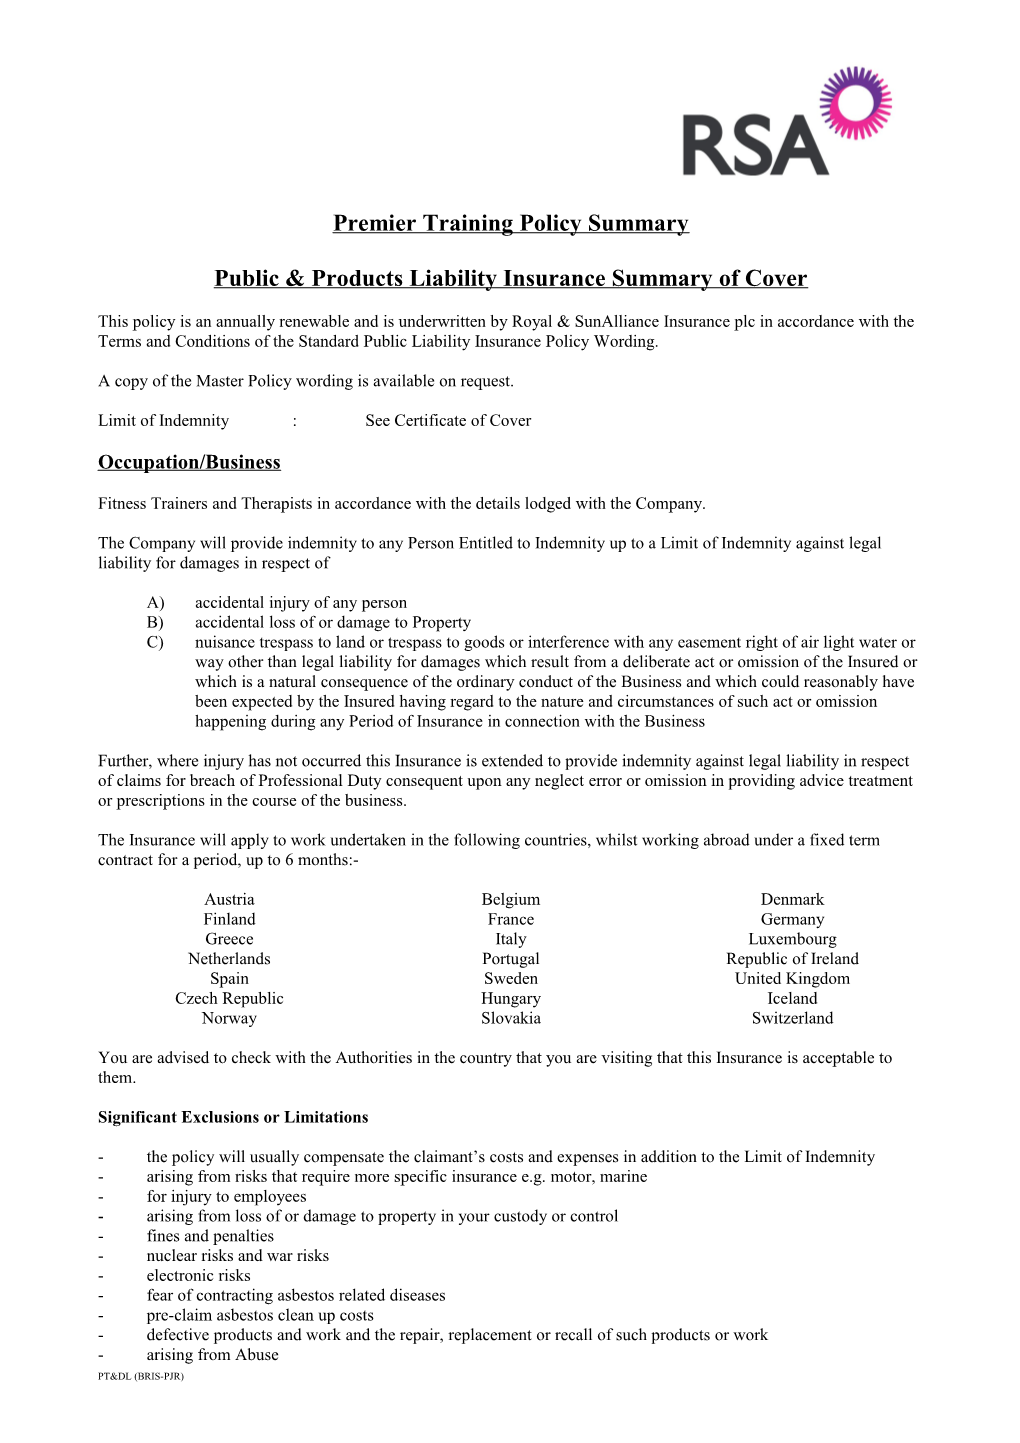 Public & Products Liability Insurance Summary of Cover